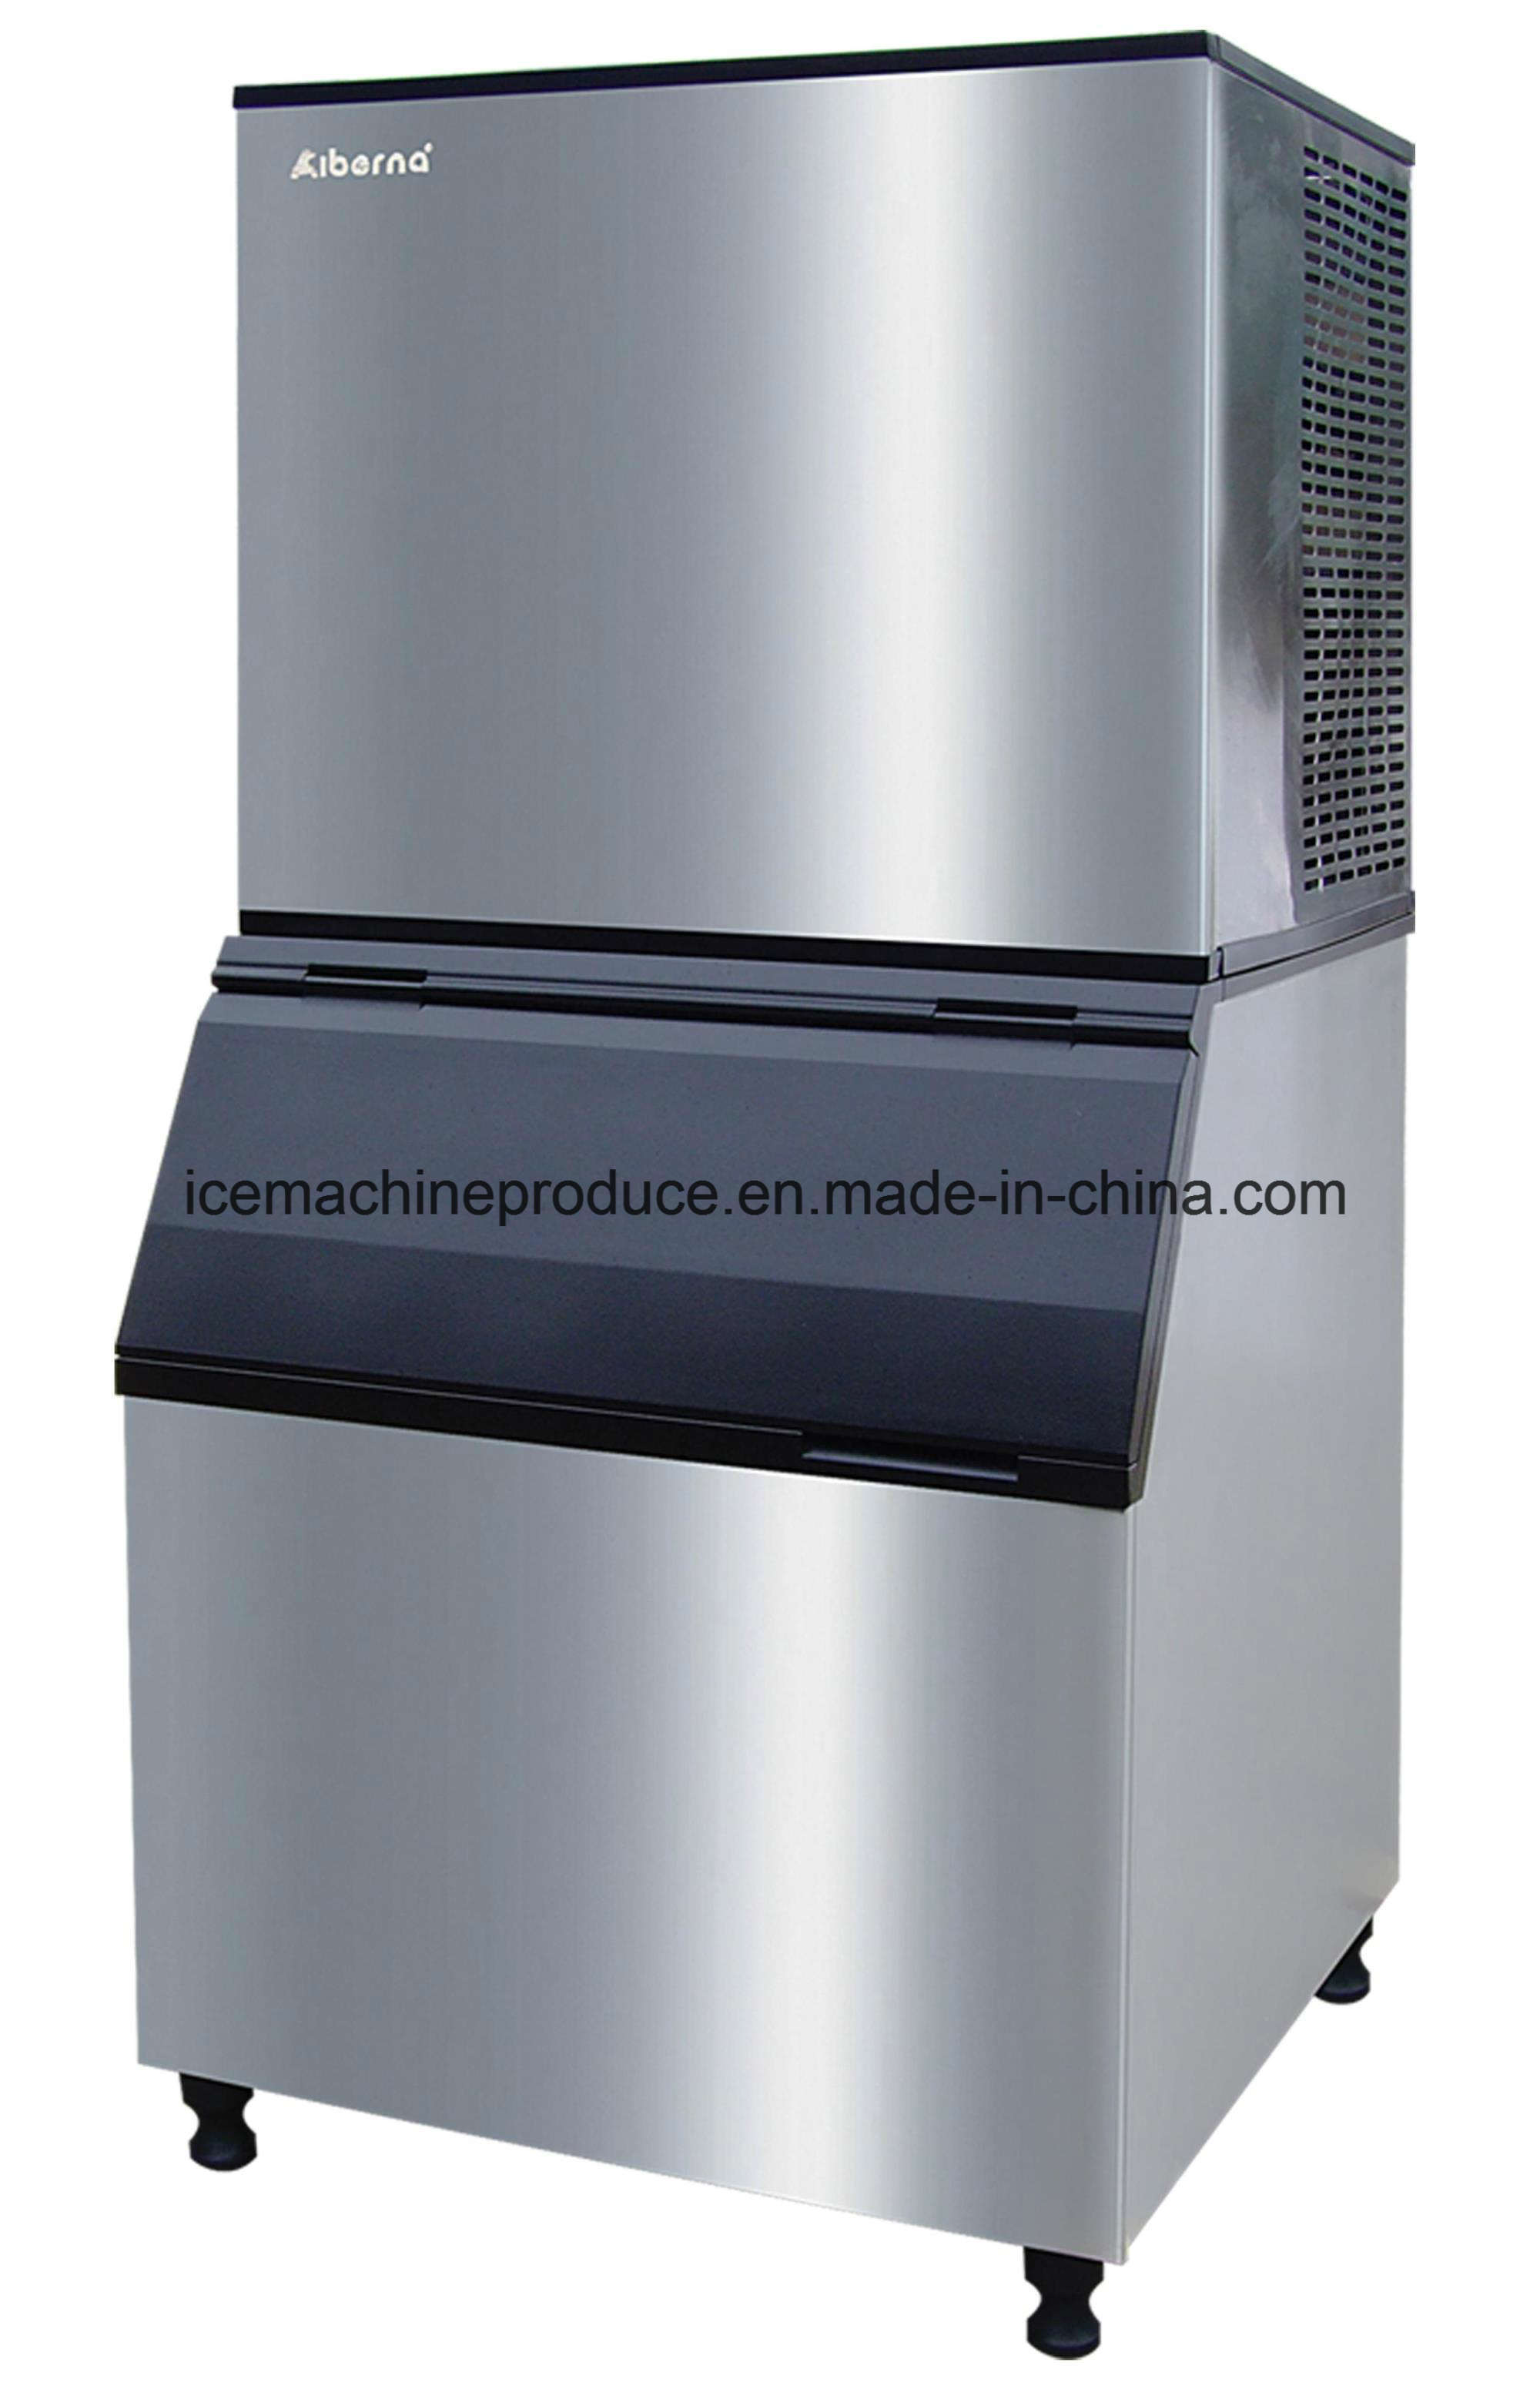 450 Kilogram Ice Making Machine Suitable for The Tropical Environment